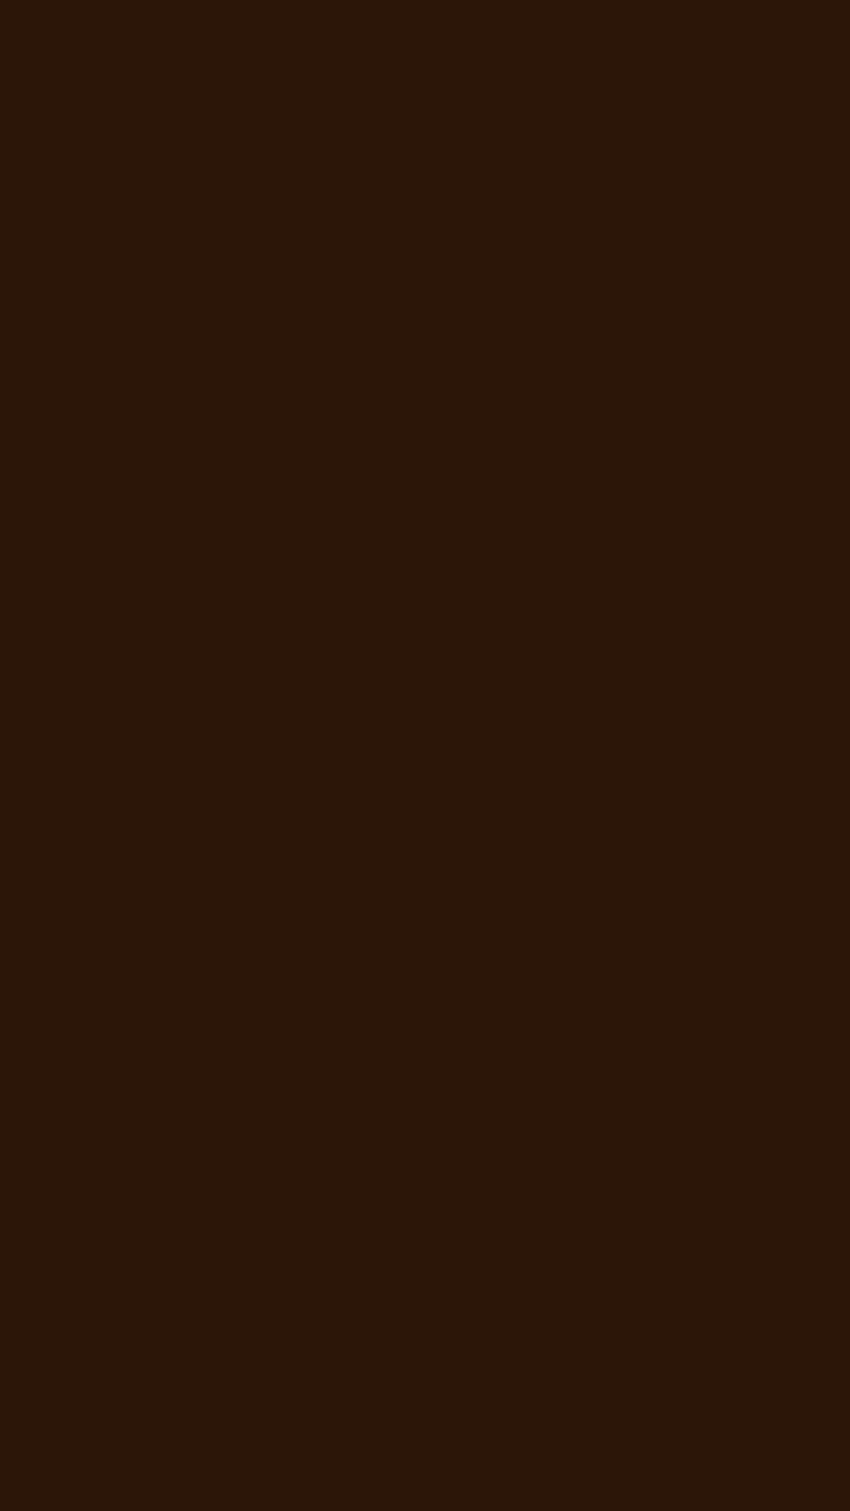 Zinnwaldite Brown Solid Color Backgrounds for, brown phone wallpaper ponsel HD